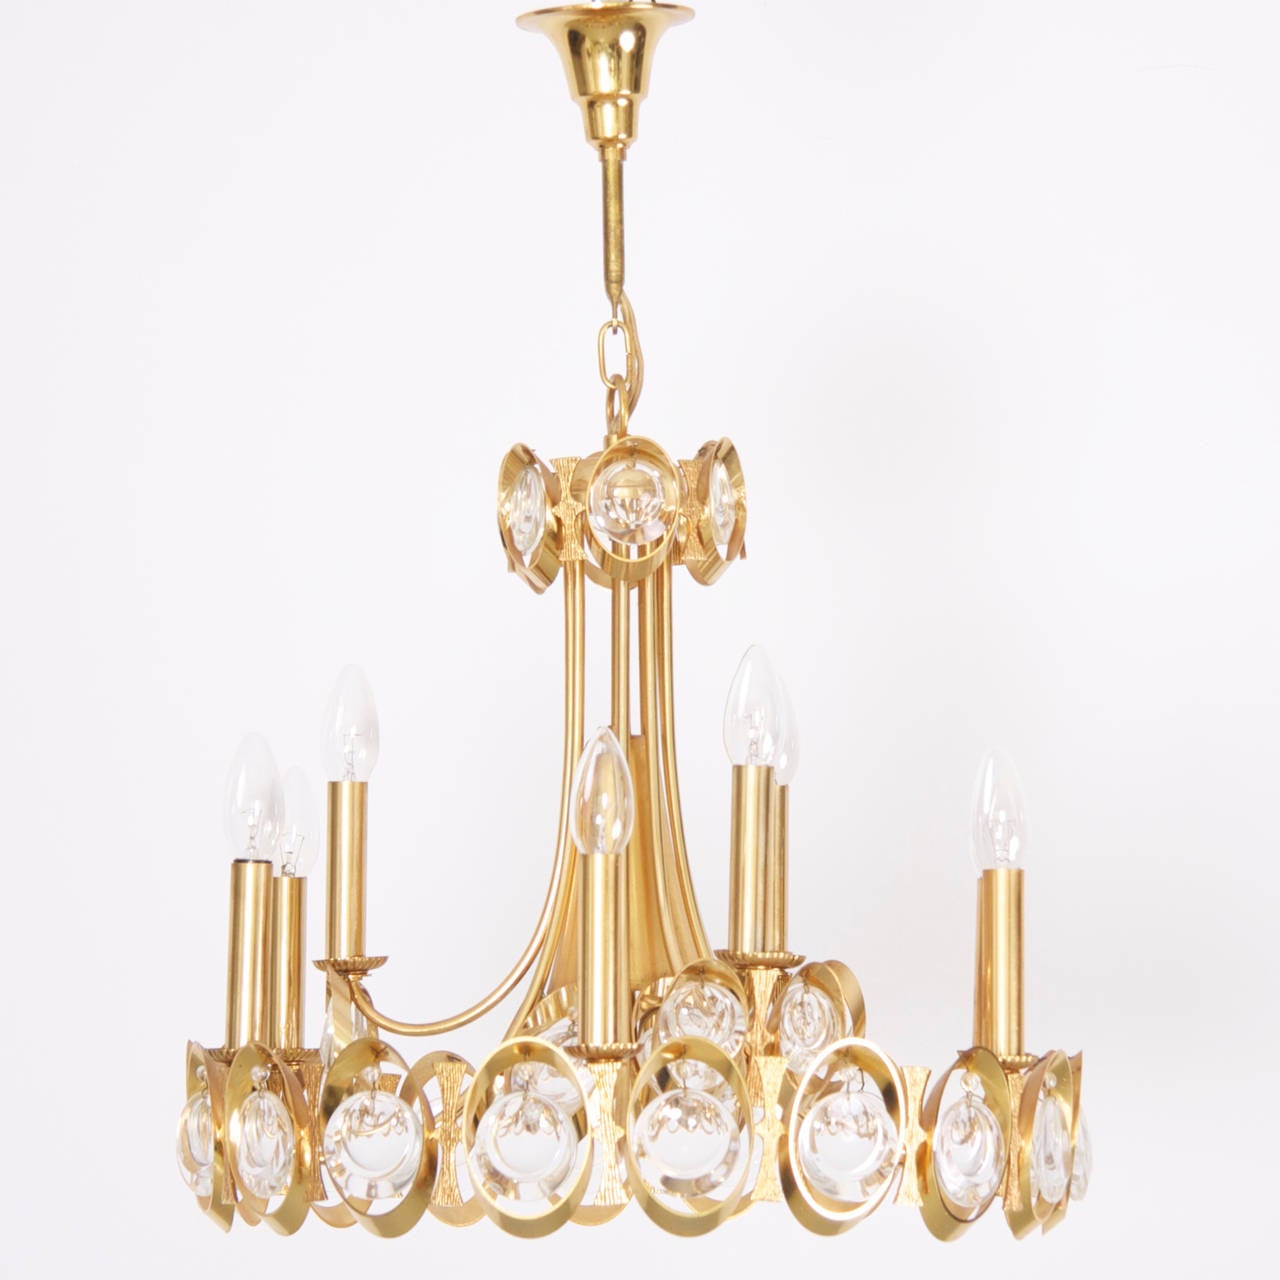 Elegant high end quality chandelier from Palwa. The chandelier has a 24-carat gilt brass frame with wonderful jewel like glasses, which floats every room in a beautiful warm light. It is fitted with nine E14 bulbs and one E27
To be on the the safe